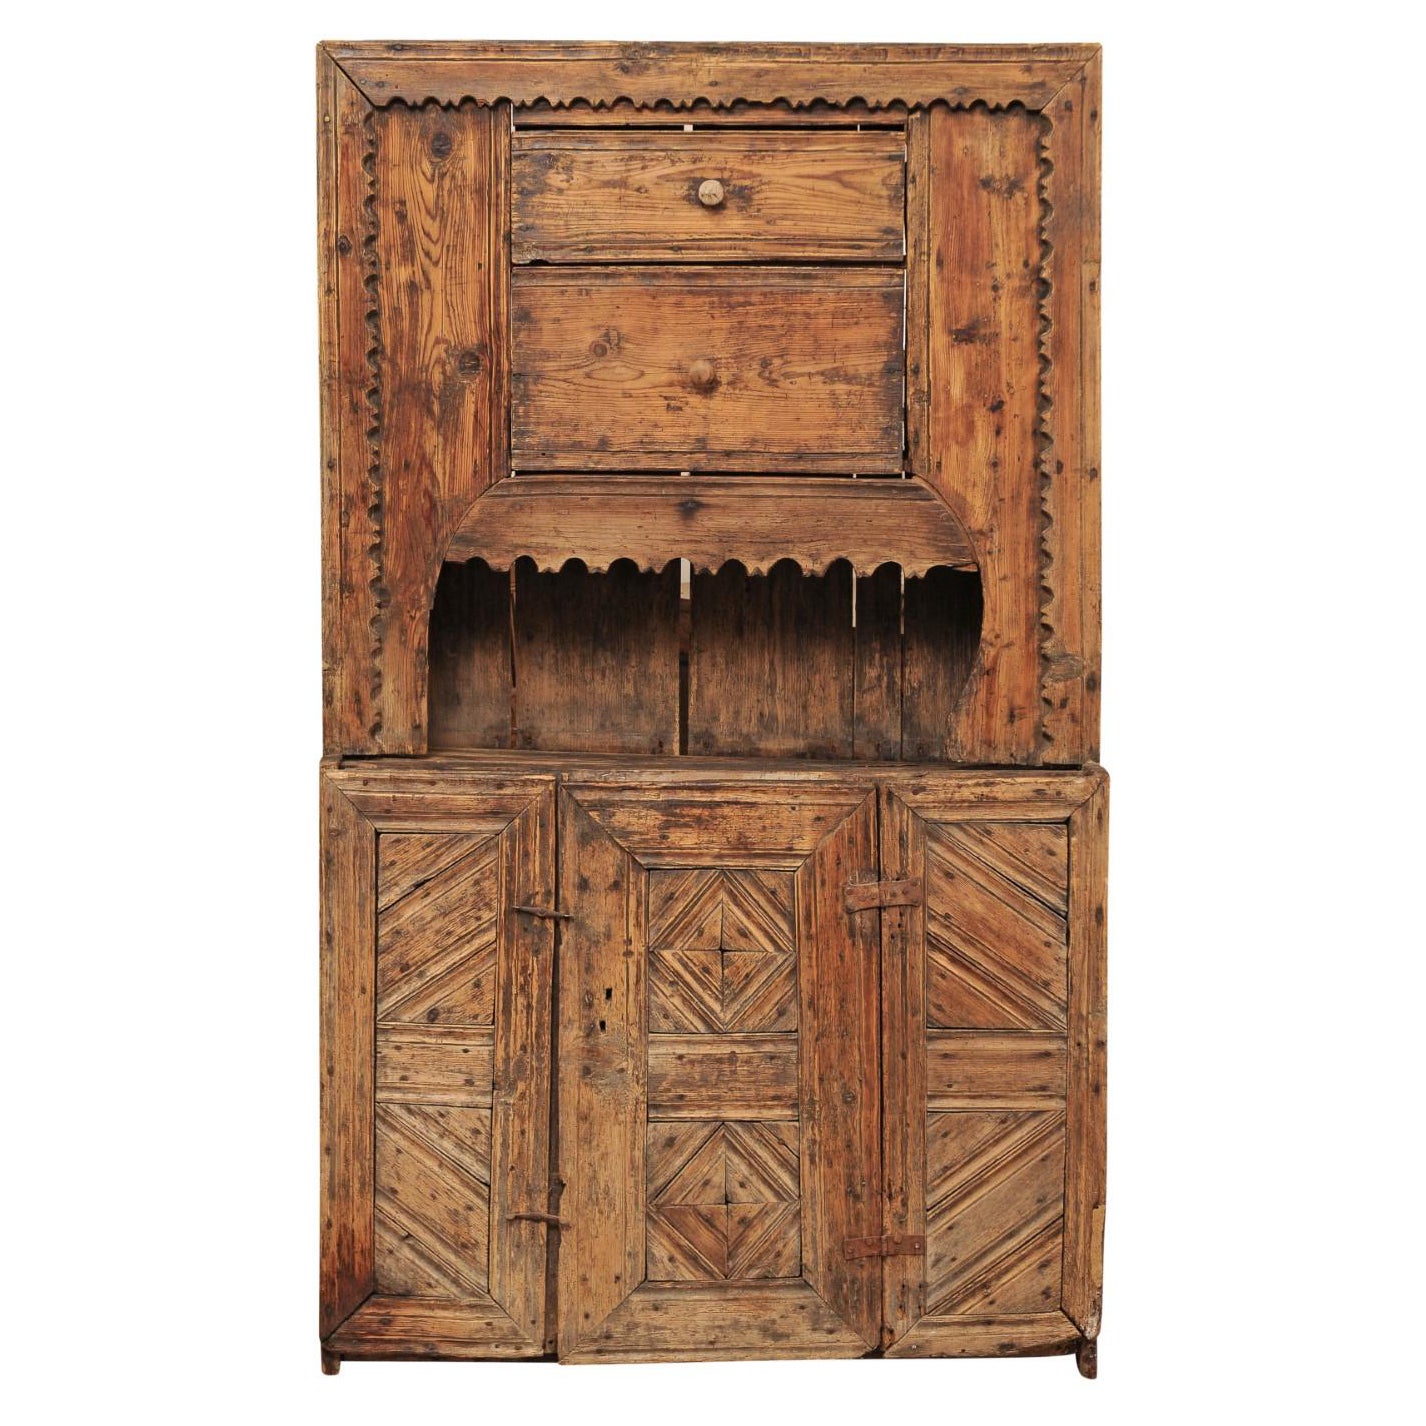 17th Century Spanish Pine Cabinet with 2 Drawers & Open Shelf above Cabinet Door